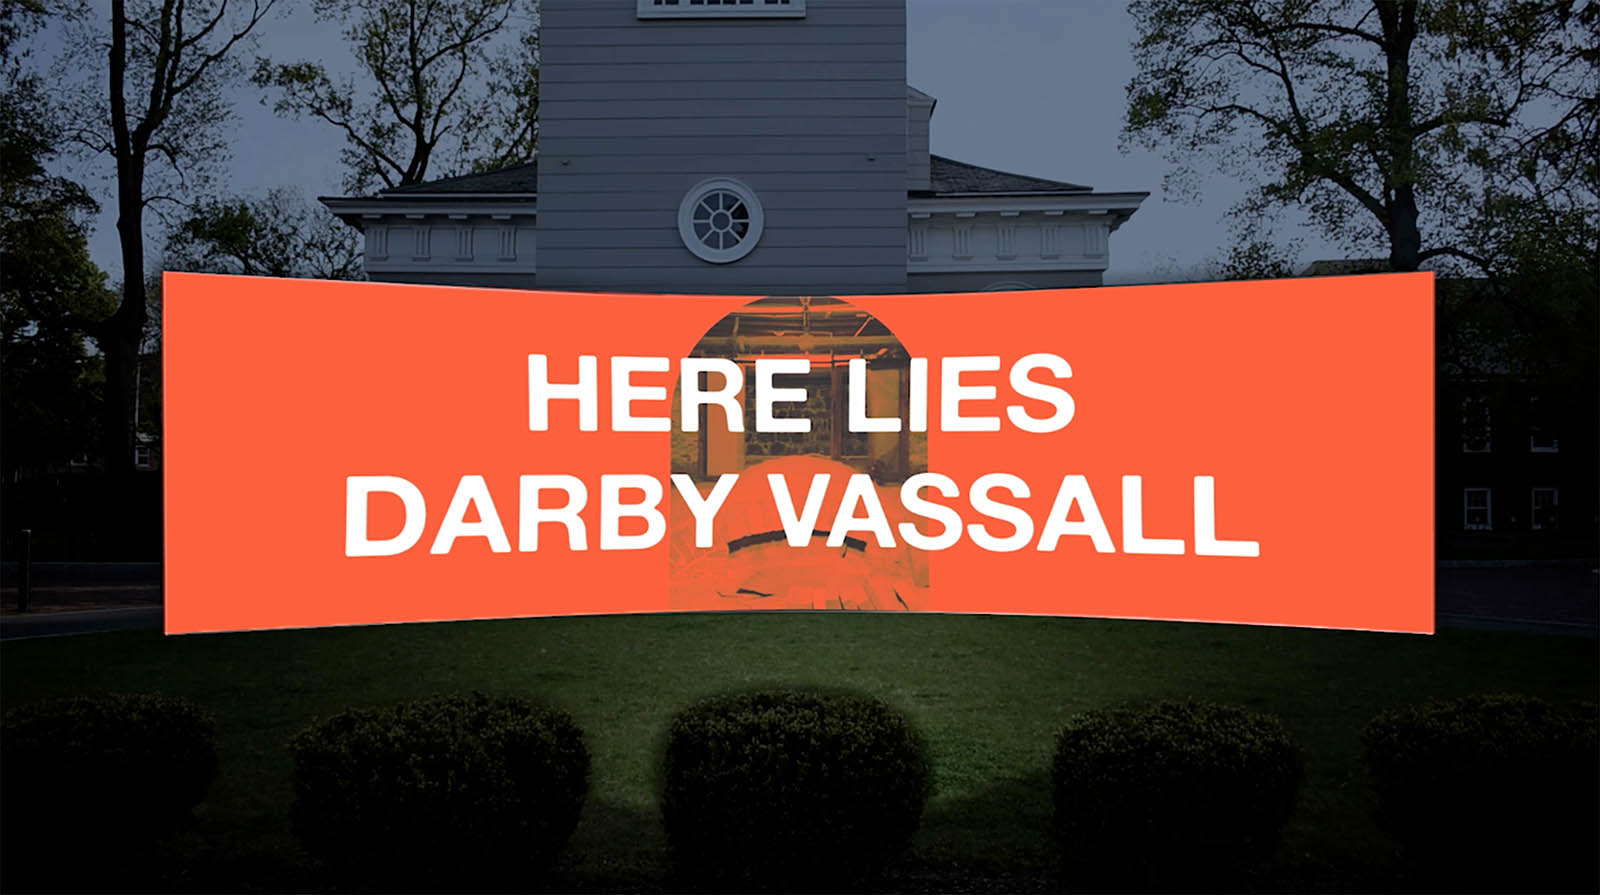 visualization of curved wall with video screen that reads "HERE LIES DERBY VASSALL"